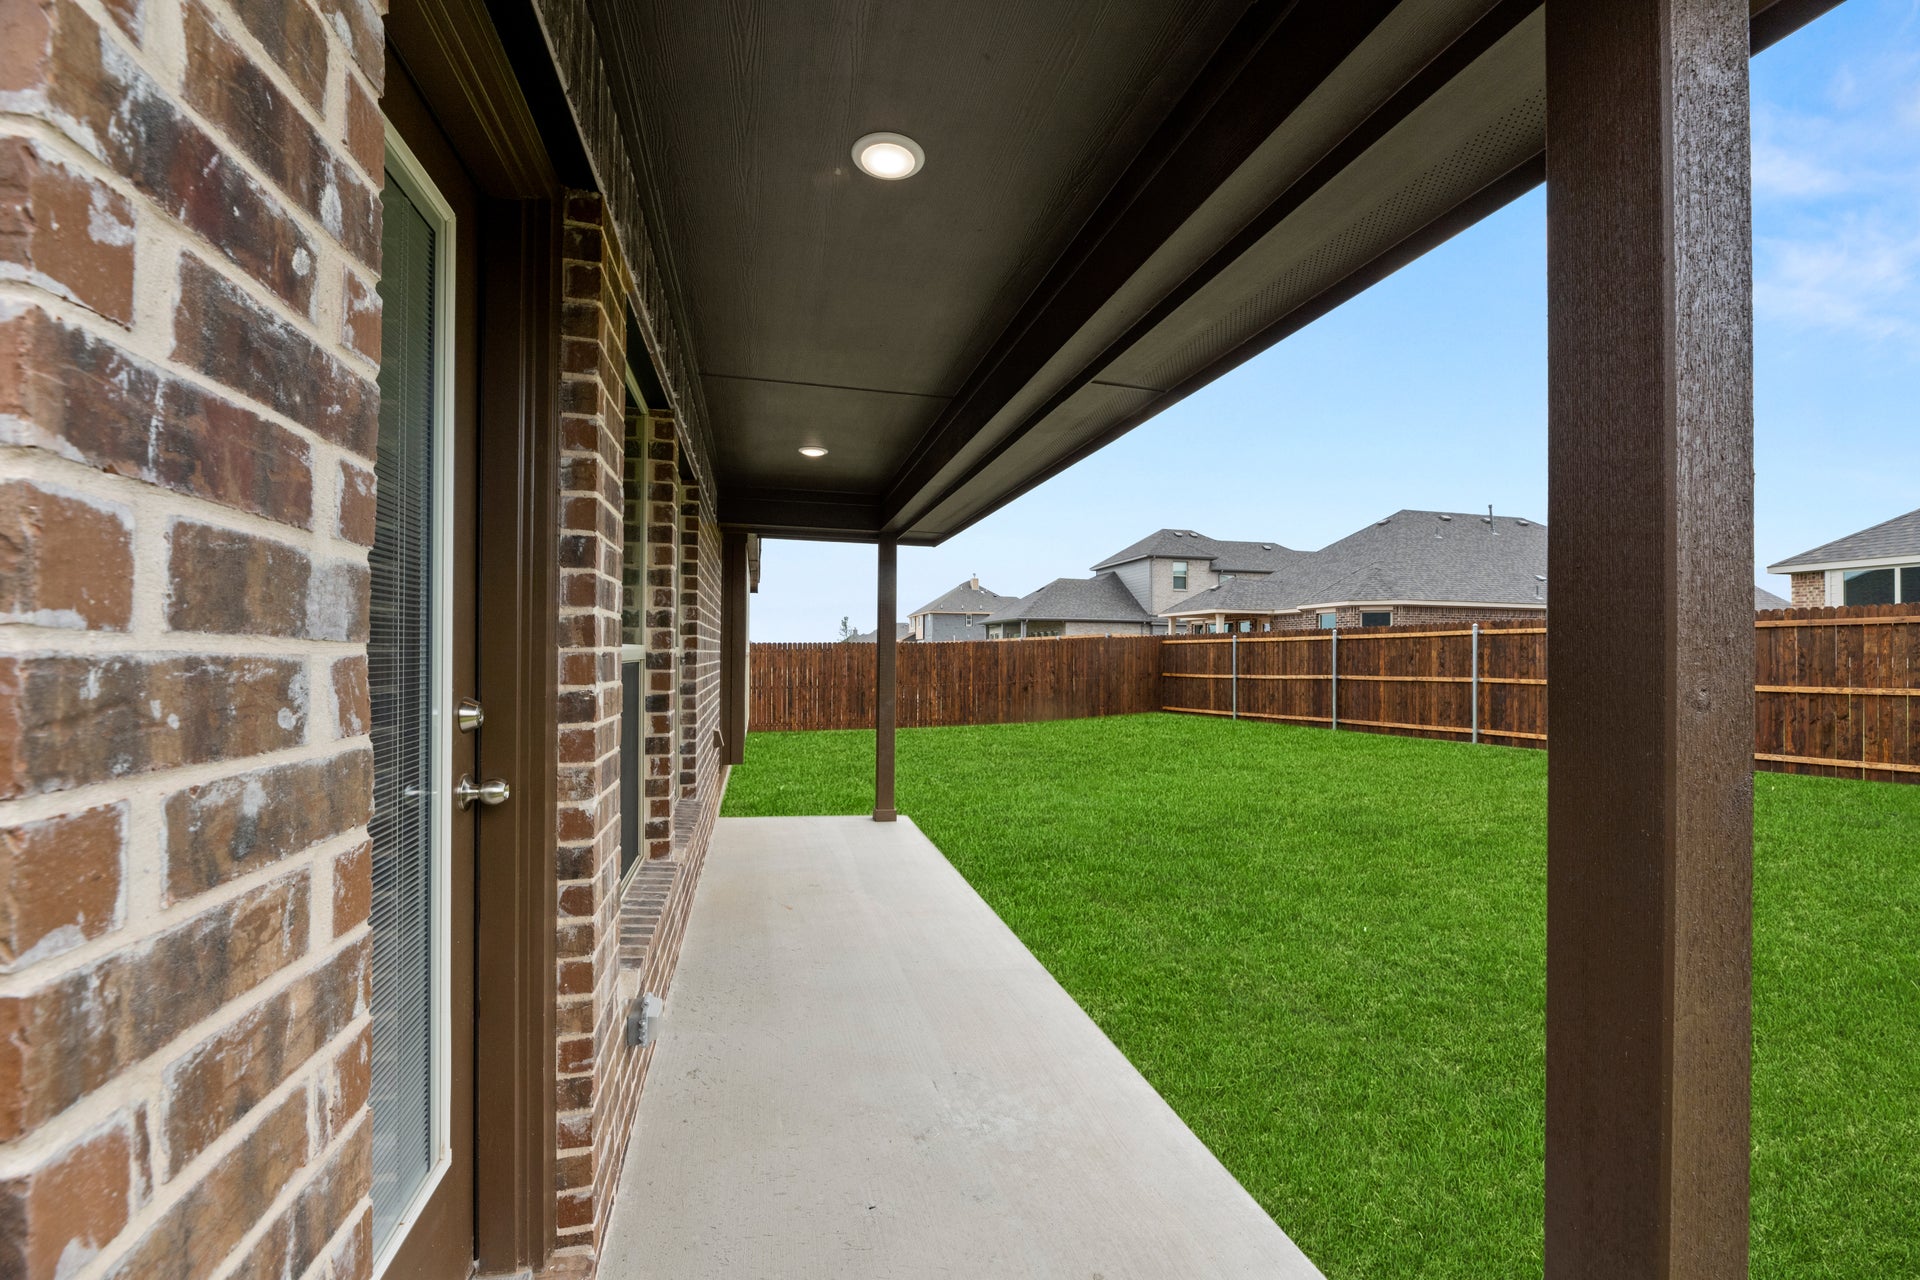 1,868sf New Home in Crowley, TX